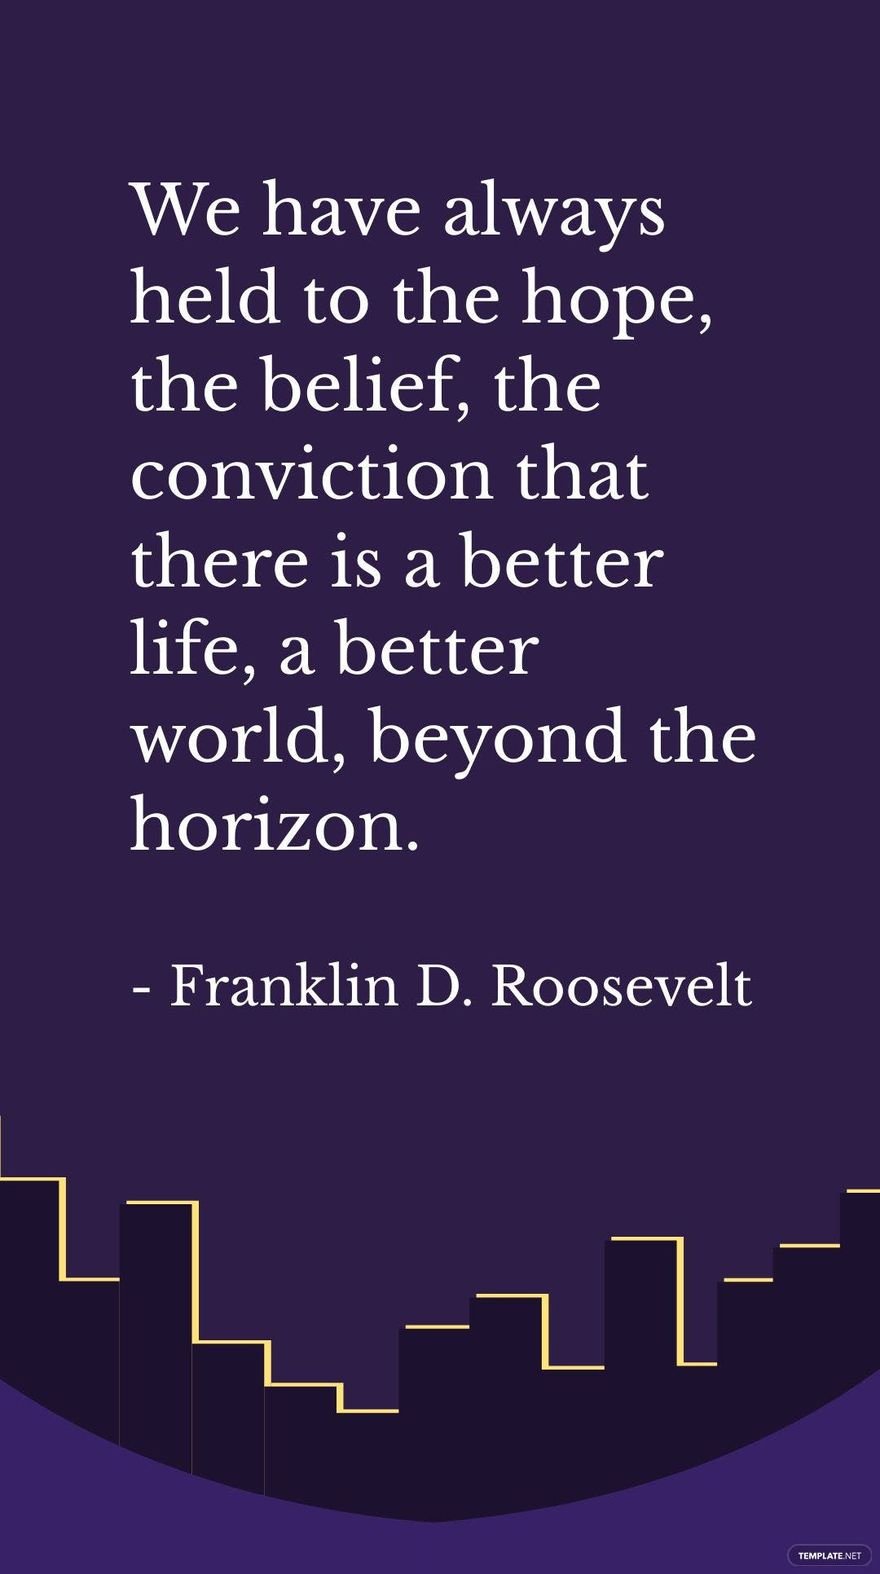 Franklin D. Roosevelt - We have always held to the hope, the belief, the conviction that there is a better life, a better world, beyond the horizon.